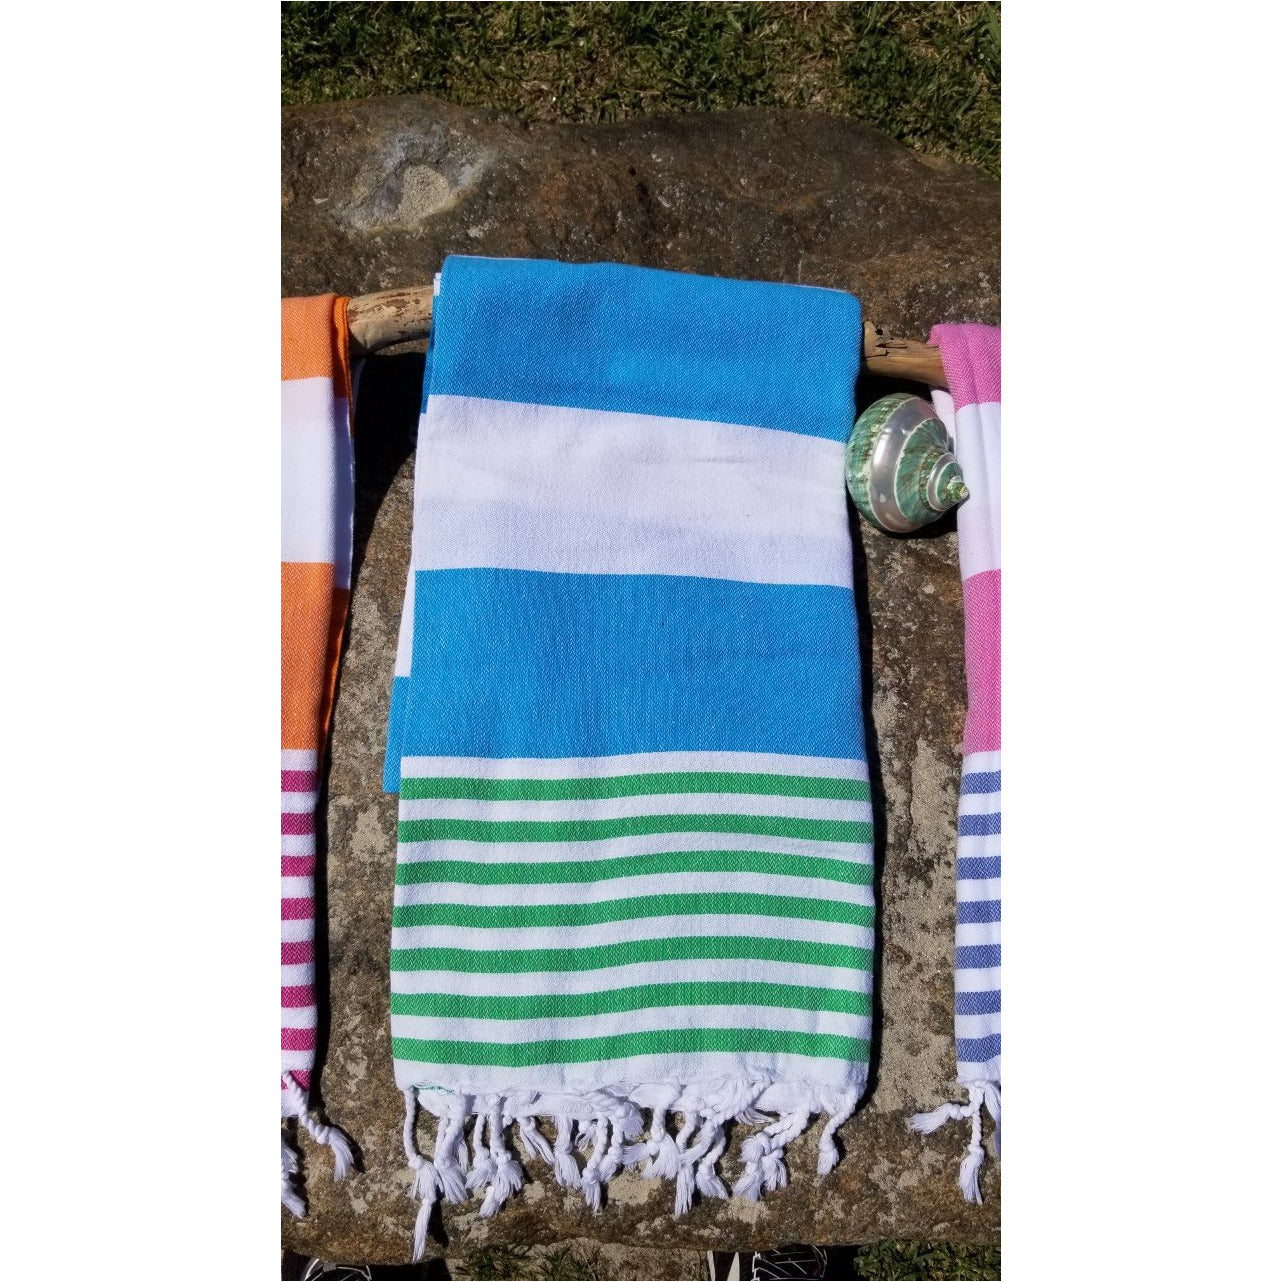 Over-sized, colorful bold stripes, our Mediterranean towel is beautifully hand-loomed with hand-tied fringe. 